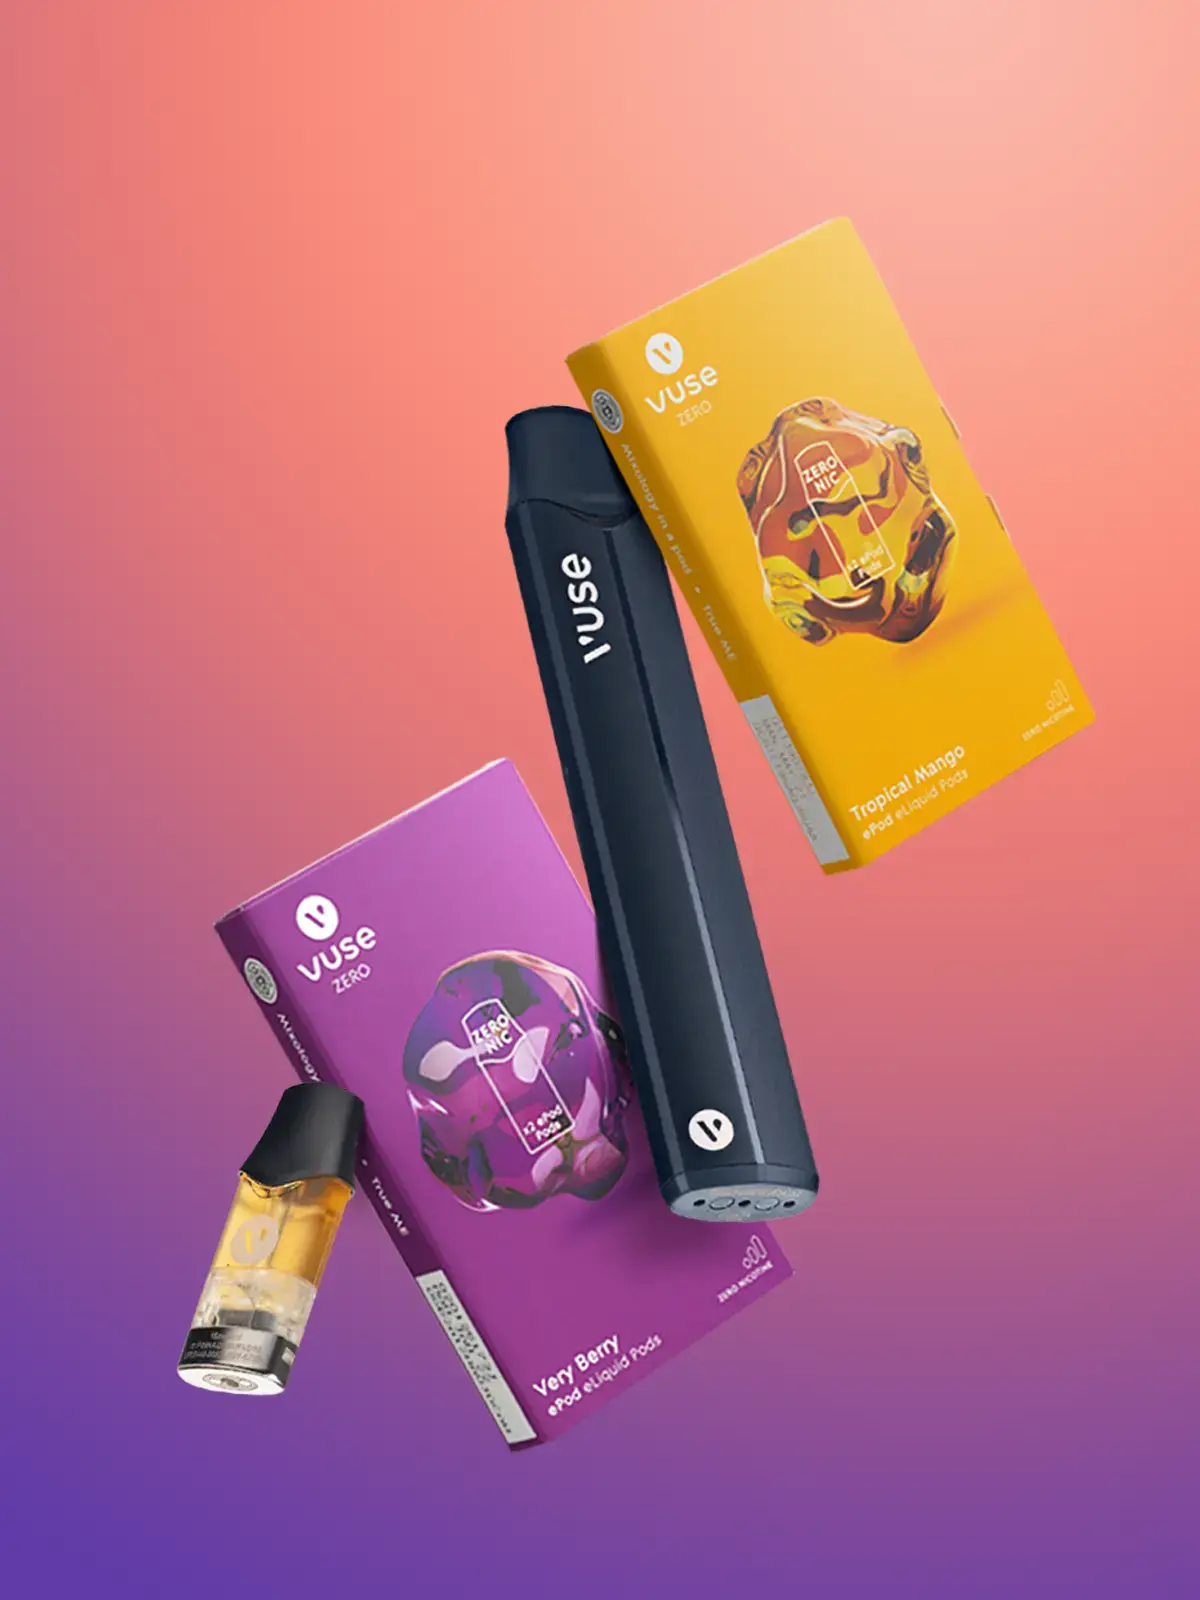 A black VUSE Pro device along with two packs of VUSE ePod cartridges, and a single ePod cartridge out of the box, floating in front of an orange and purple background